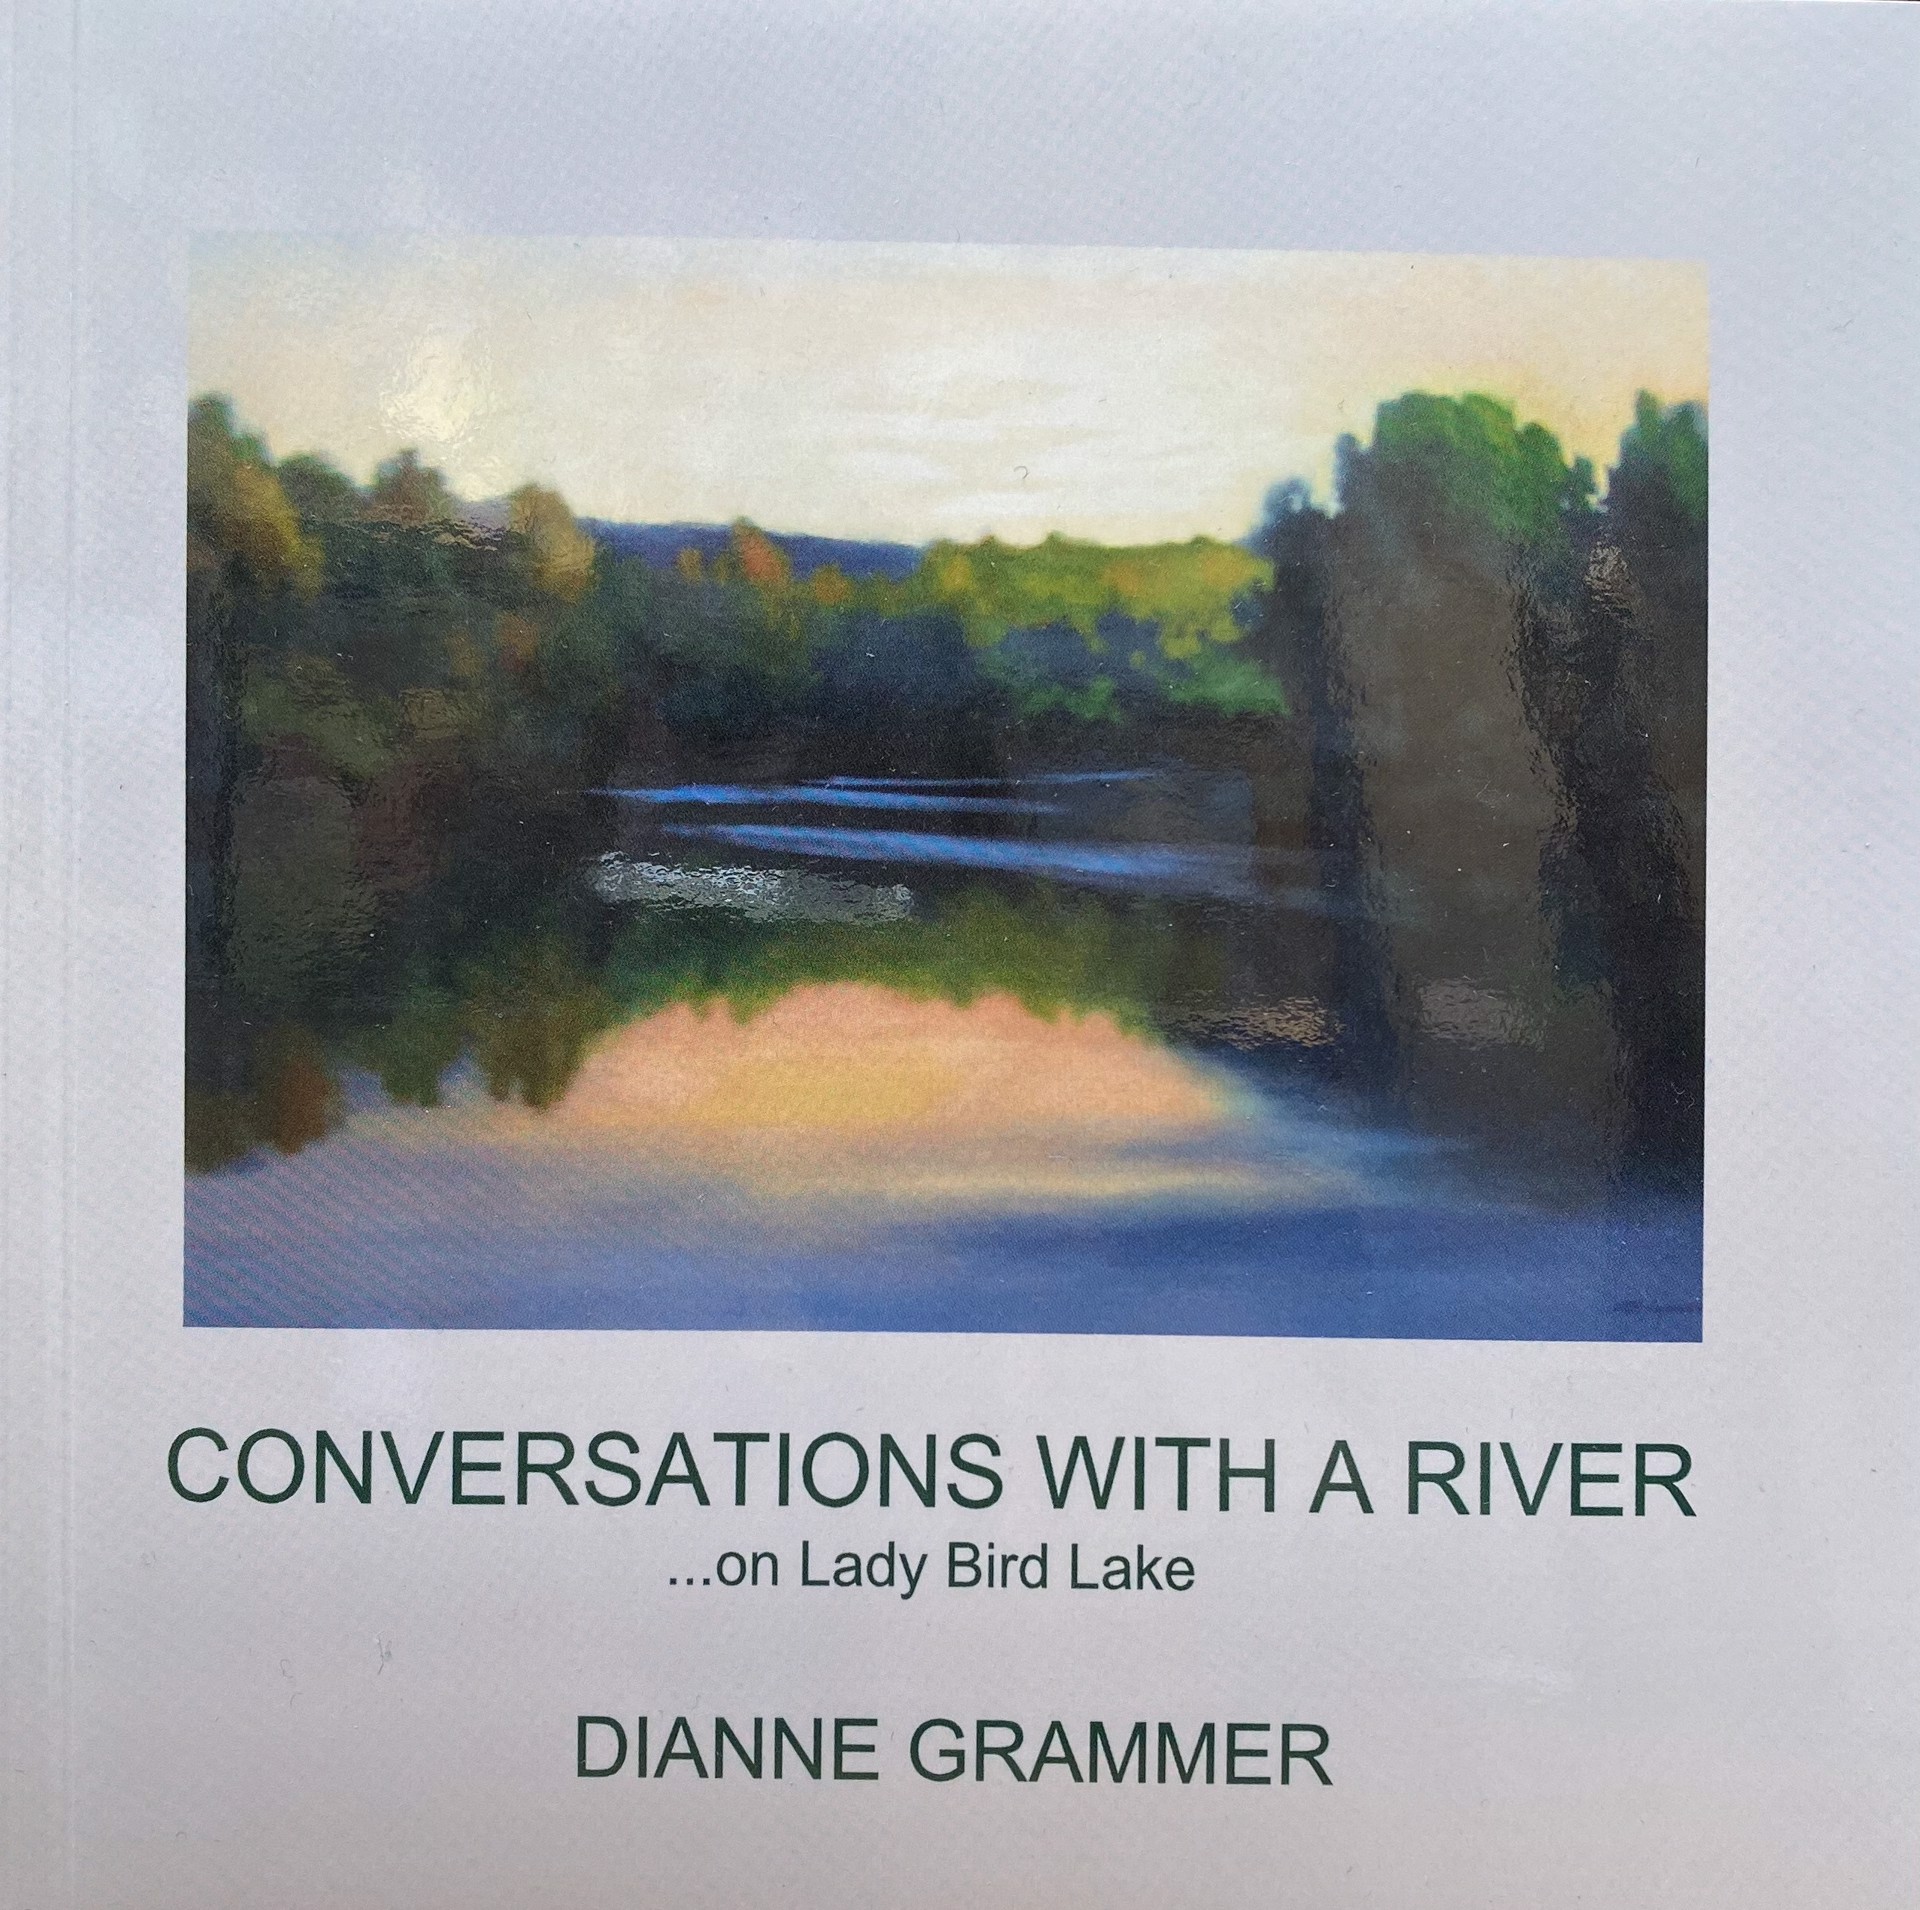 Dianne Grammer: Conversations with a River... (SC; 33/33) by Dianne Grammer